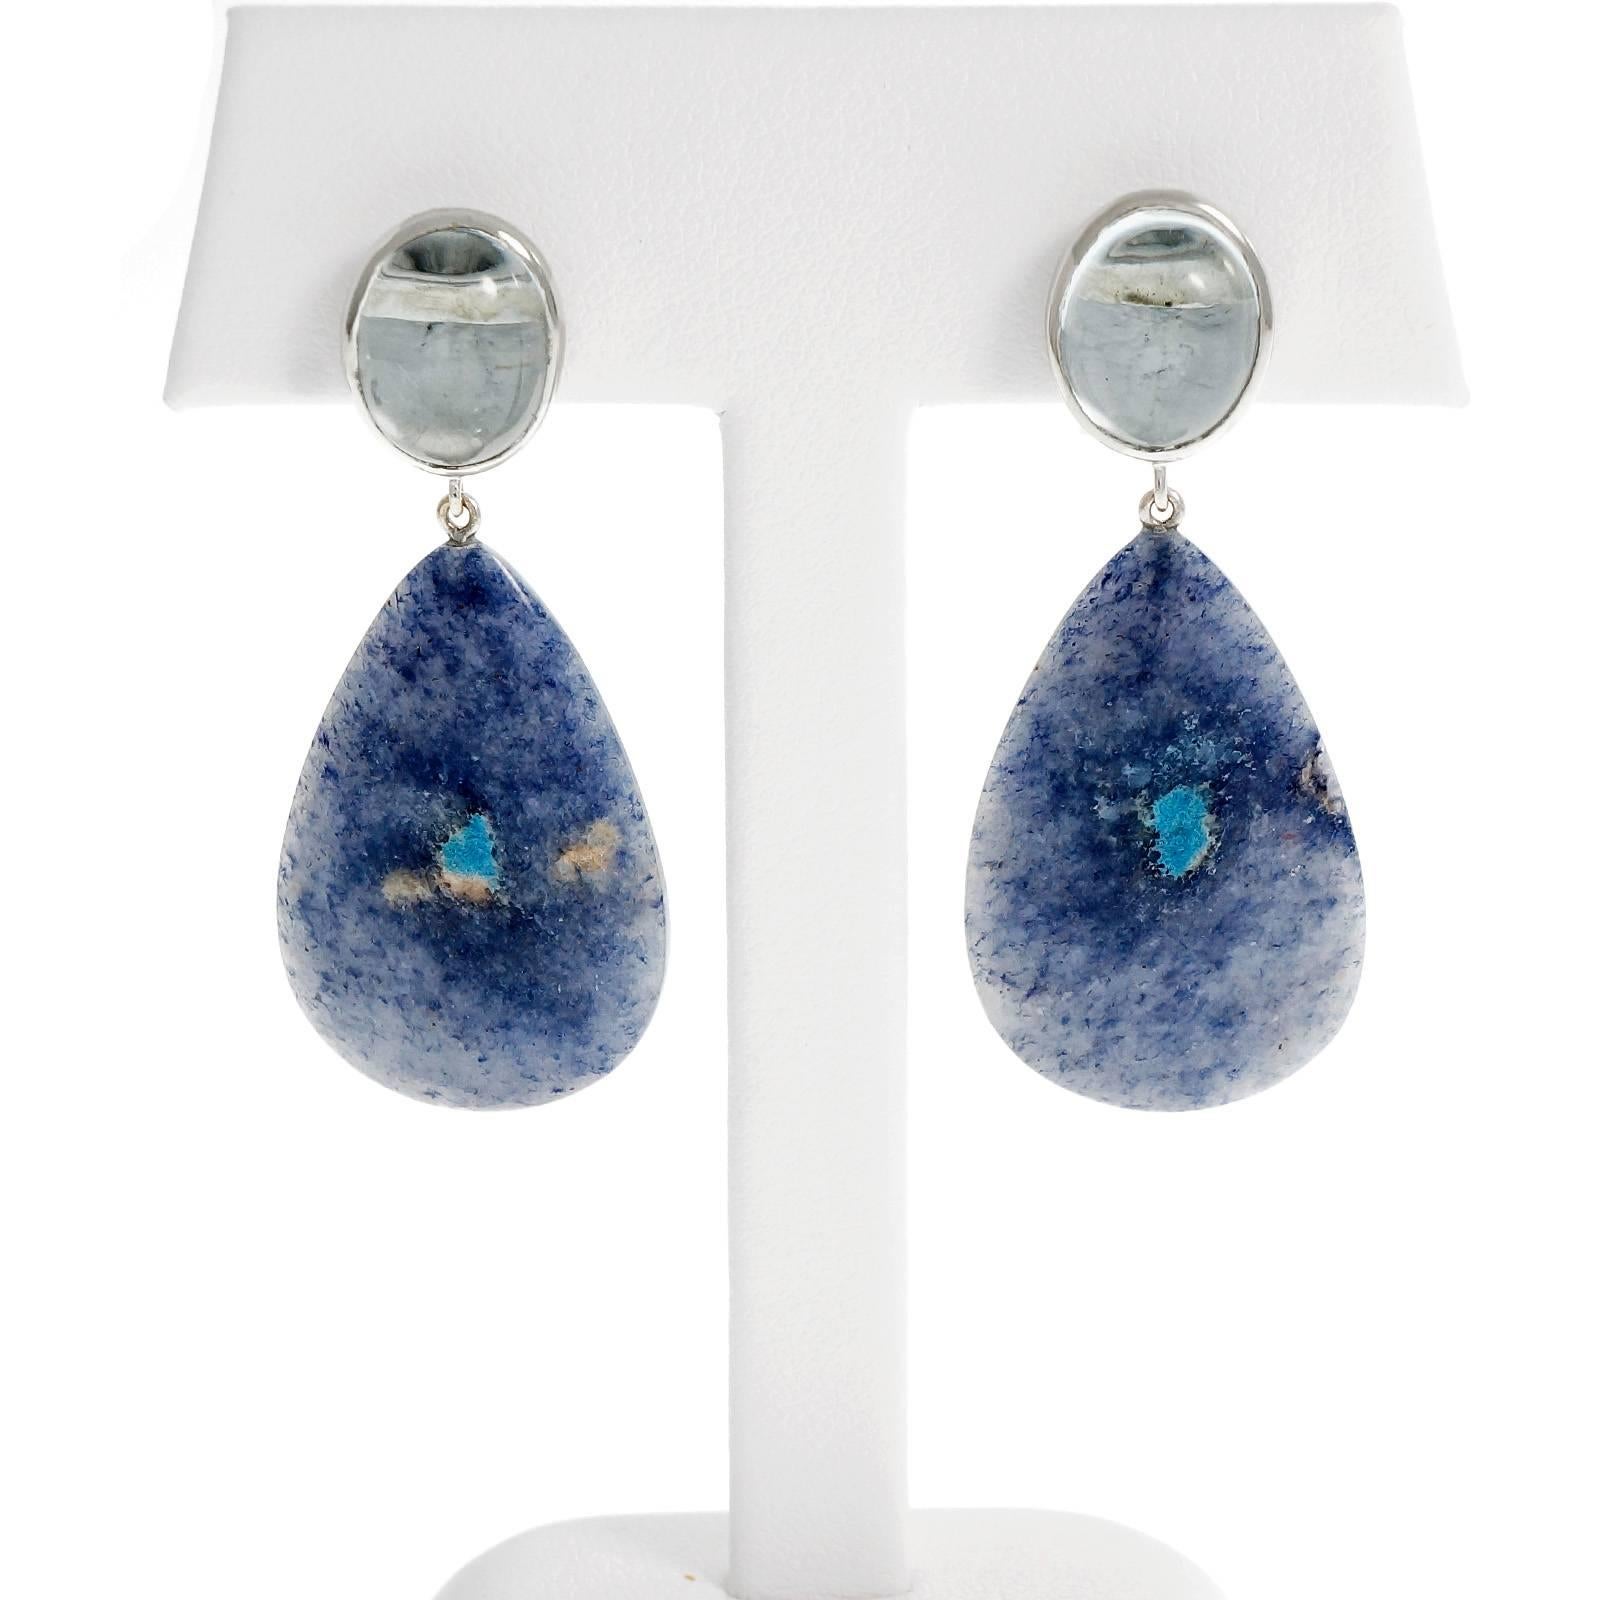 Peter Suchy dangle earrings with cabochon oval Aqua tops and Quartz pear shape dangle with Lazulite and Trolleite. 18k white gold

2 oval cabochon blue Aquamarine, approx. total weight 8.75cts
2 pear shaped grey blue Quartz Lazulite Trolleite,